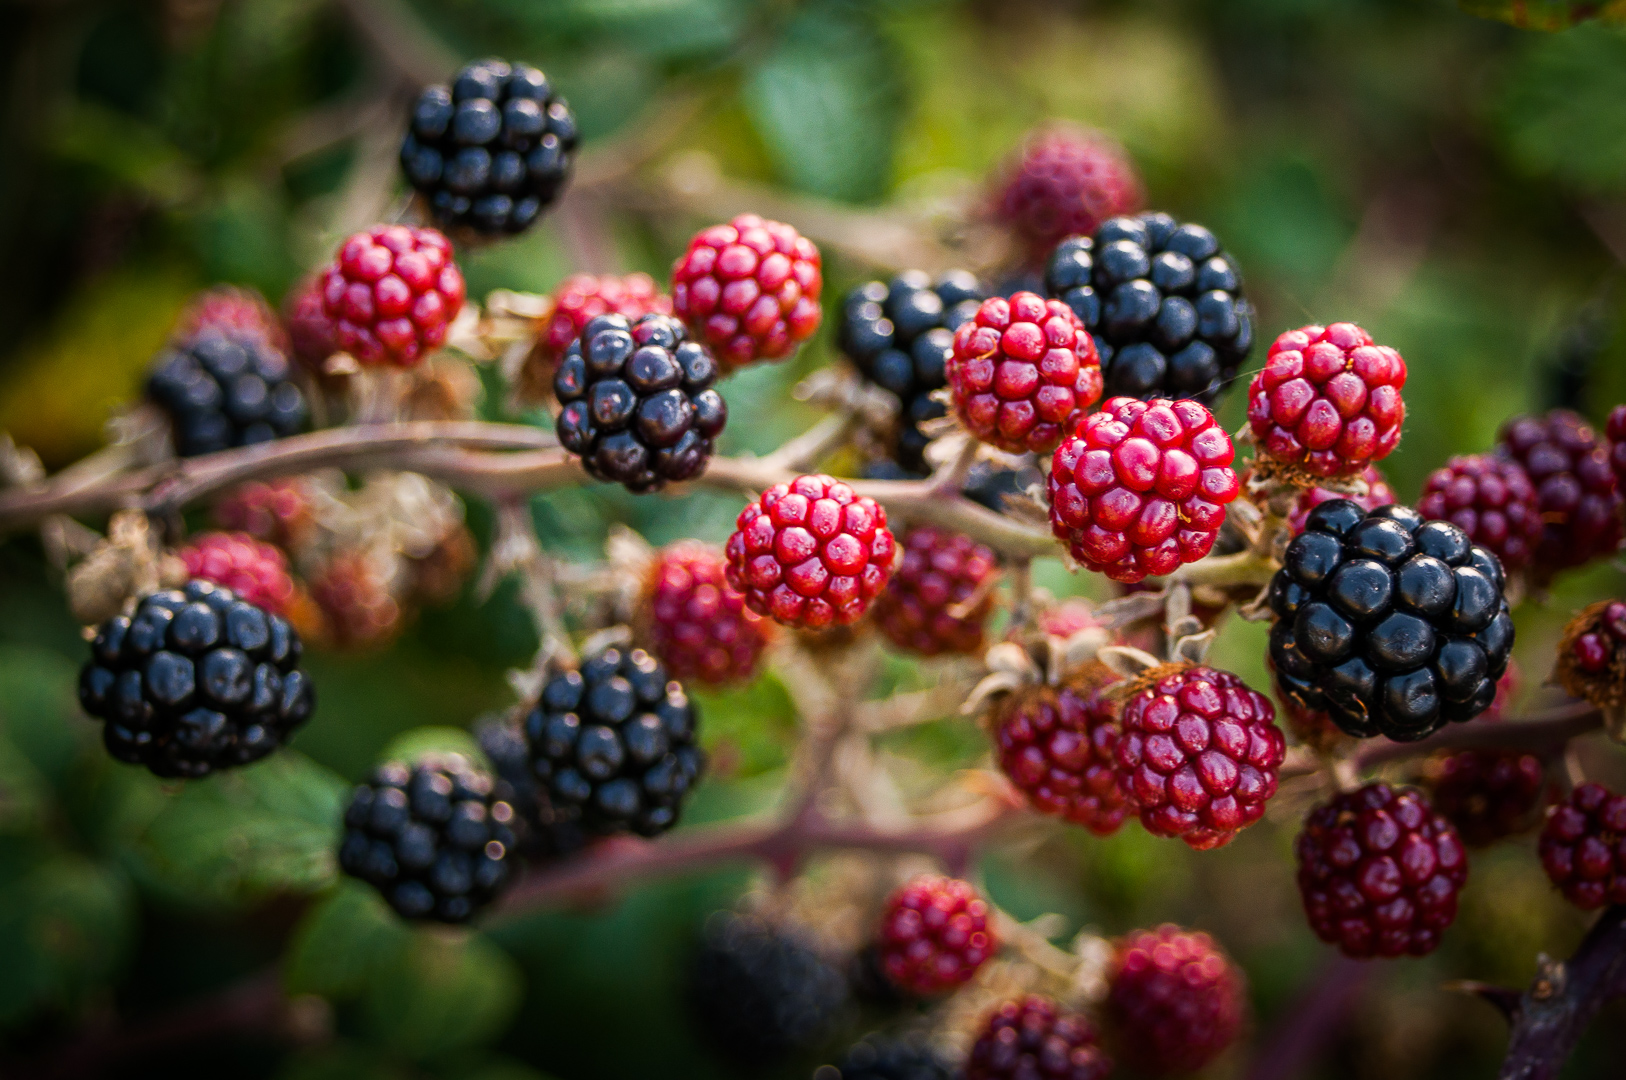 Delicious blackberries! a gift from Mother Nature! | priscillahernandez.com